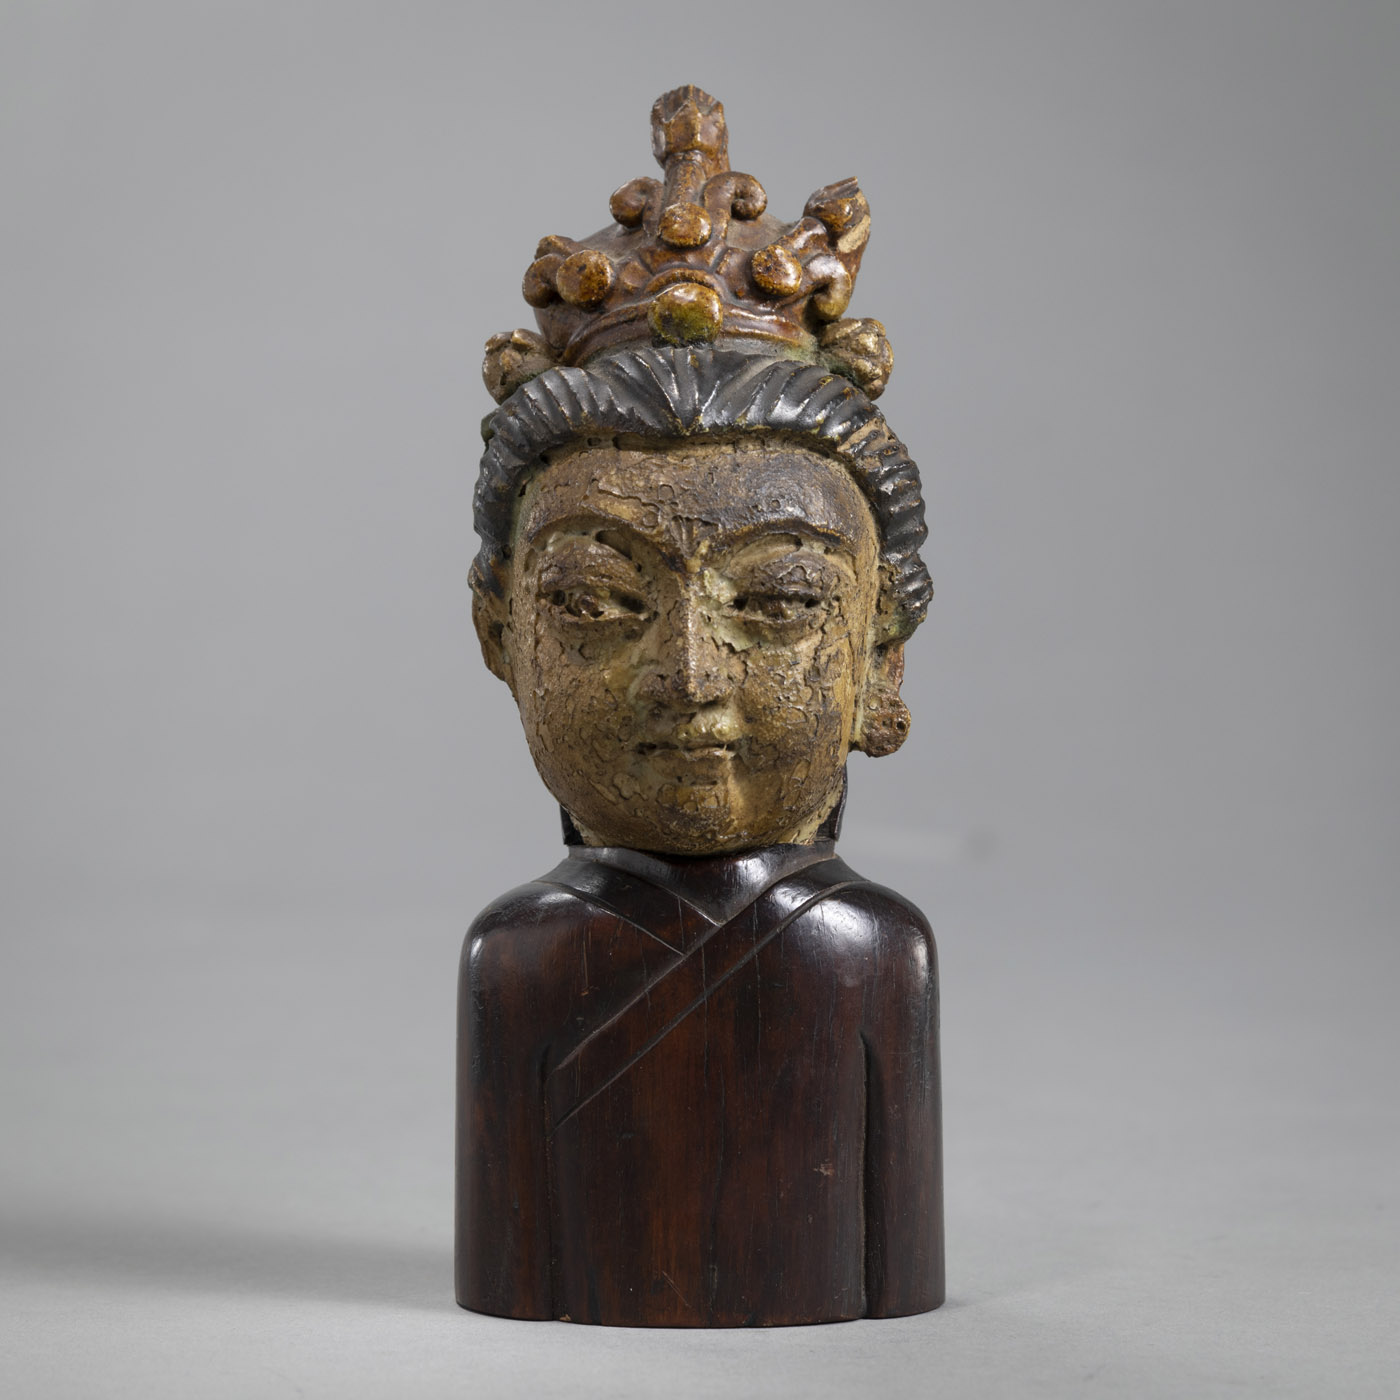 <b>A SMALL PARTLY PAINTED TERRACOTTA GUANYIN HEAD ON A WOOD STAND IN THE FORM OF A TORSO</b>